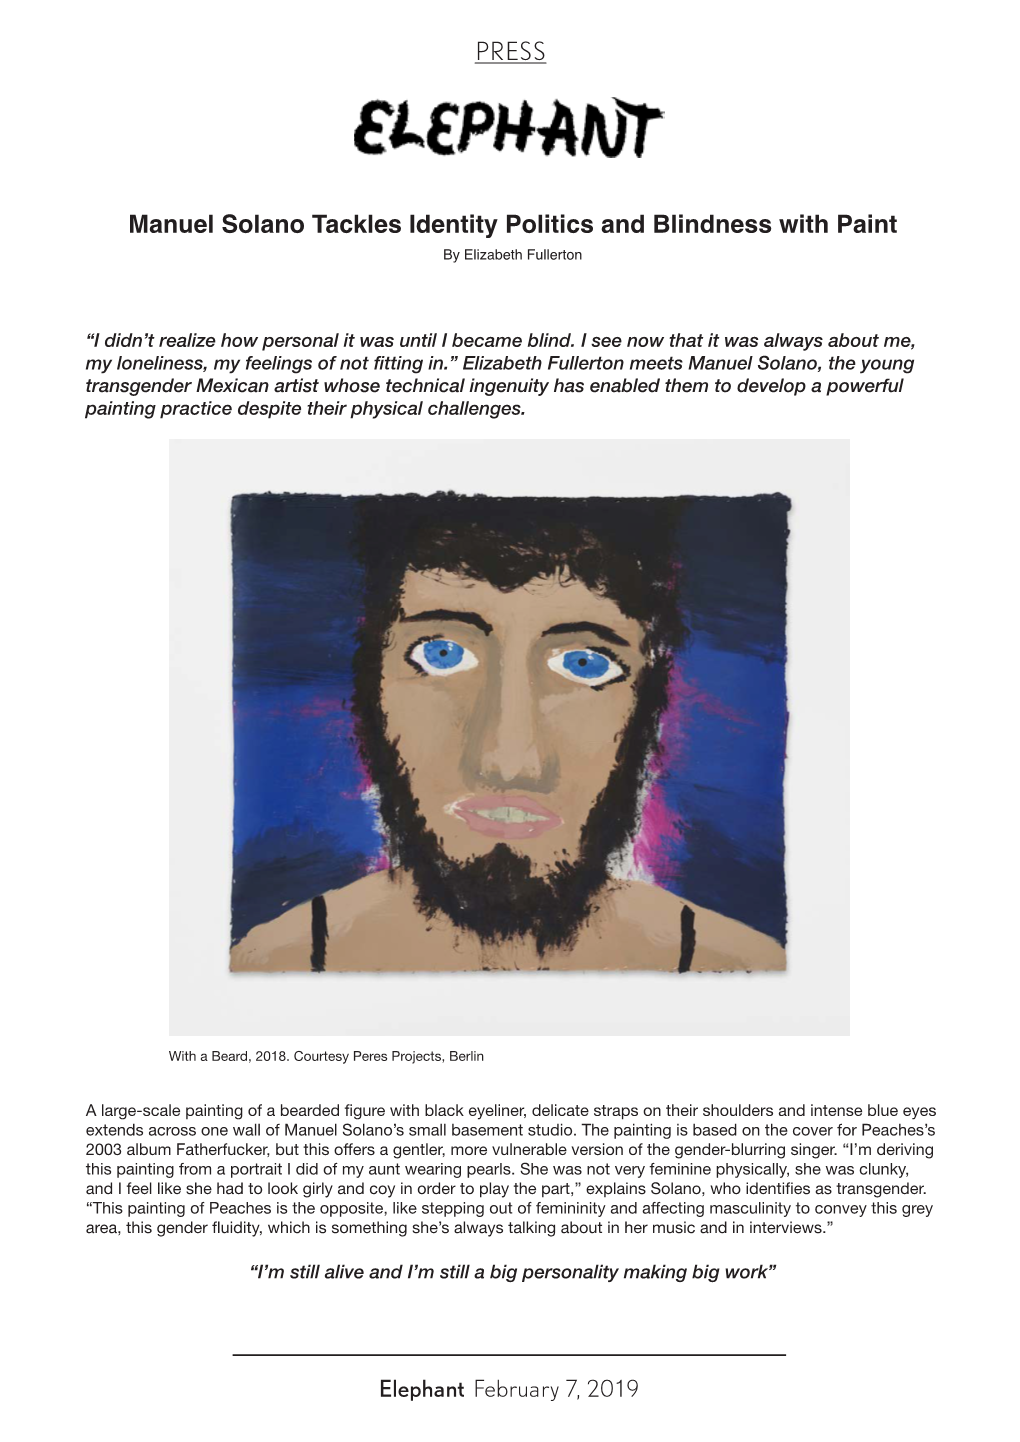 Manuel Solano Tackles Identity Politics and Blindness with Paint by Elizabeth Fullerton